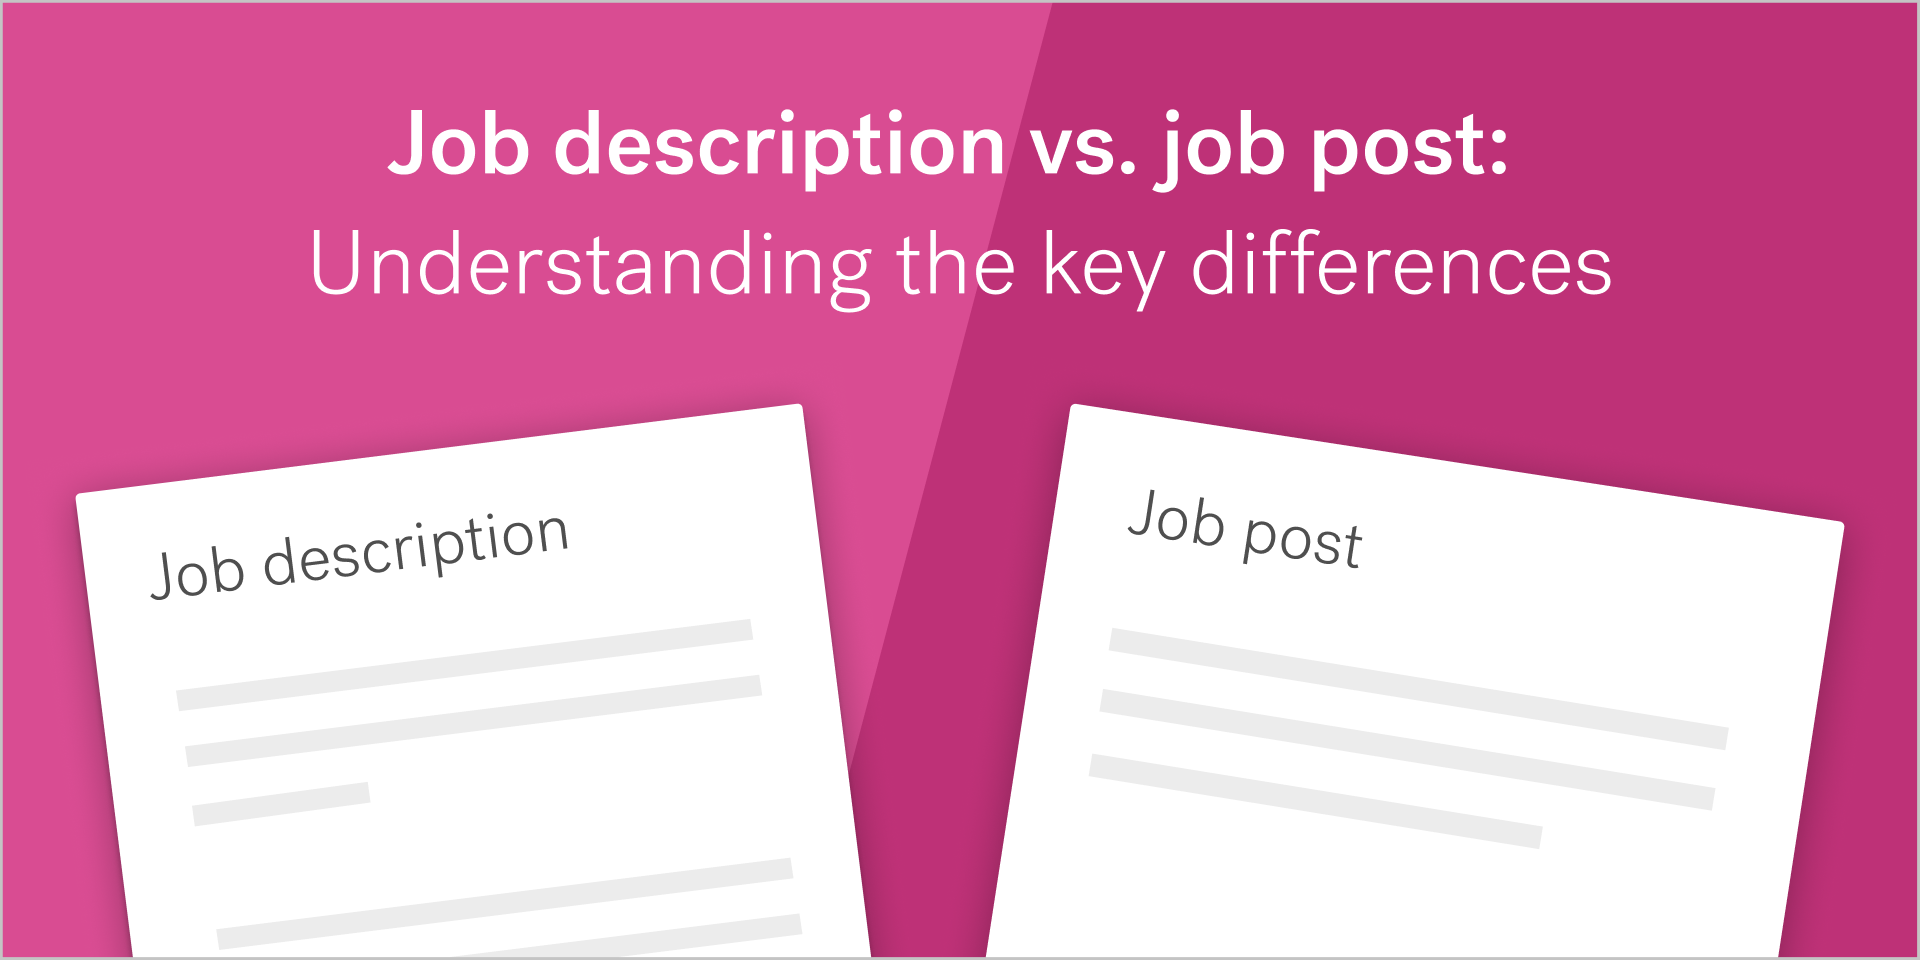 Image of a "job description" and a "job post" on a magenta background that is half light magenta and half dark magenta. The job description is a longer document and the job post is a shorter document. The title of the image is in white letters at the top and centered "Job description vs. Job Post: Understanding the Key Differences."